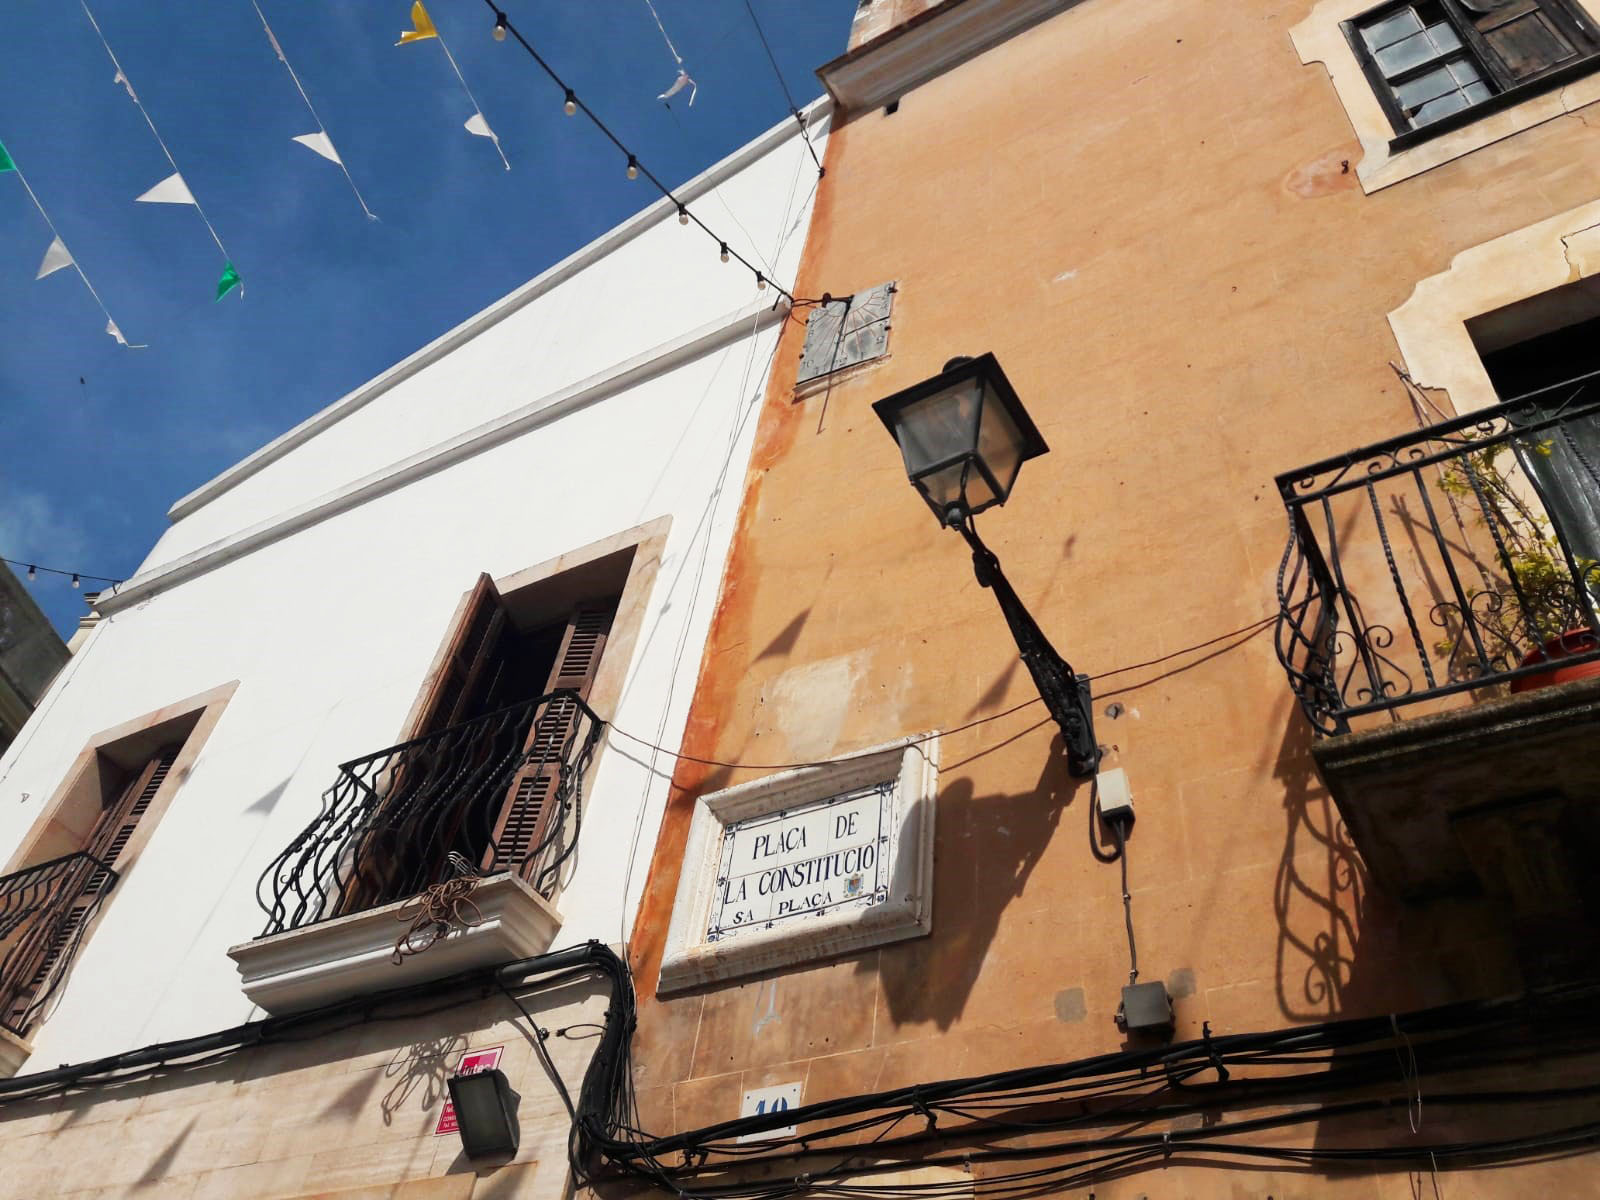 Historical streets in Alaior Menorca